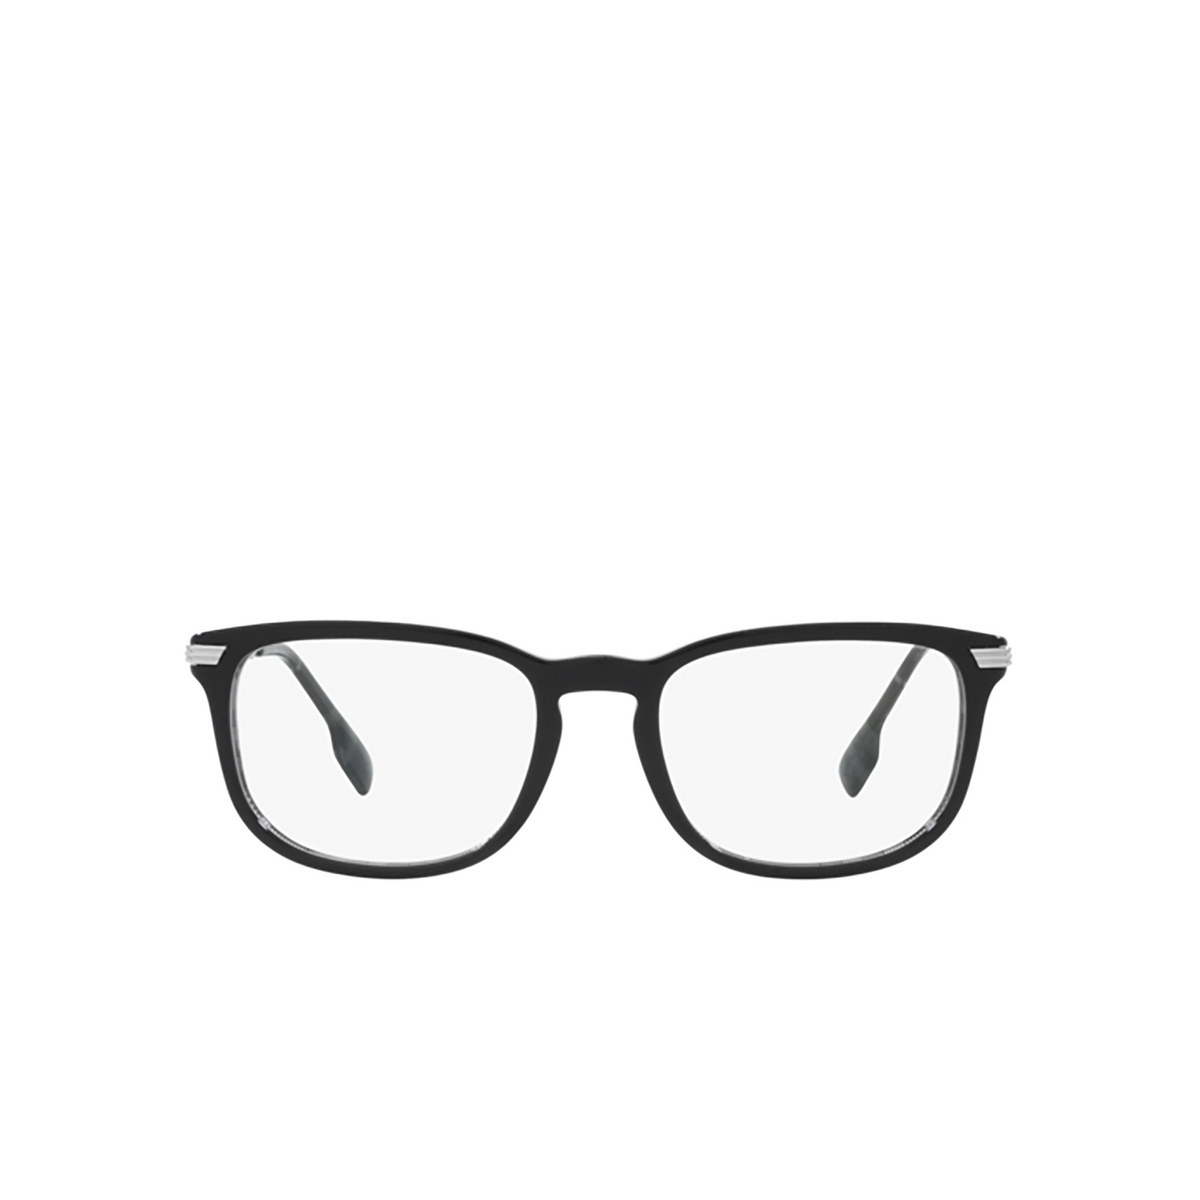 Burberry CEDRIC Eyeglasses 3829 Top Black On Charcoal Check - front view